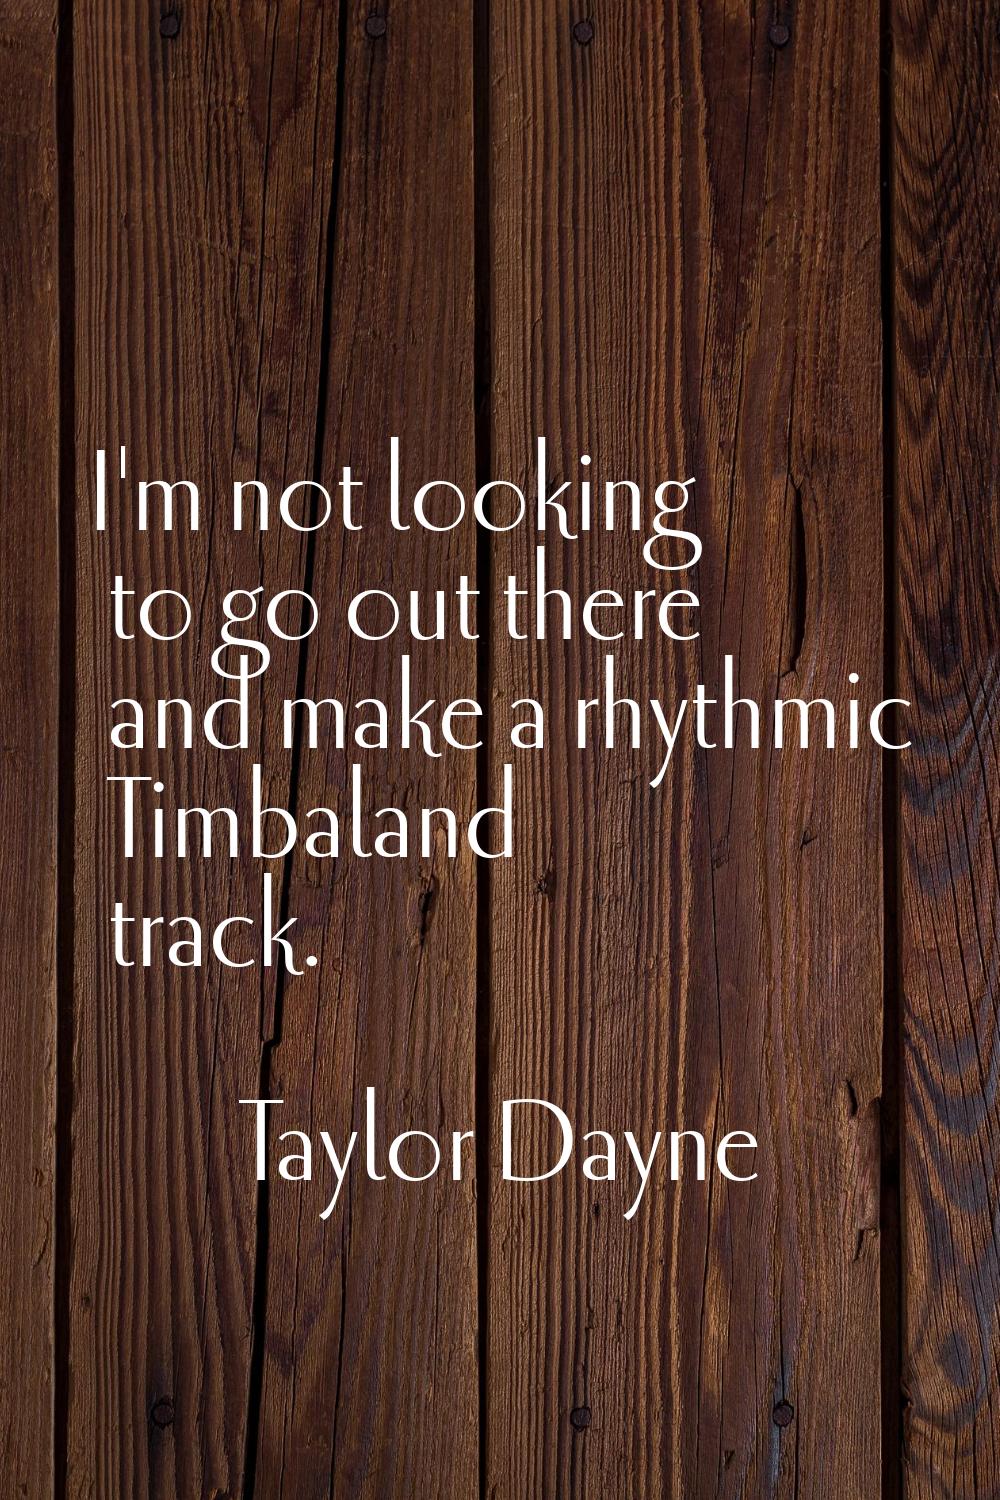 I'm not looking to go out there and make a rhythmic Timbaland track.